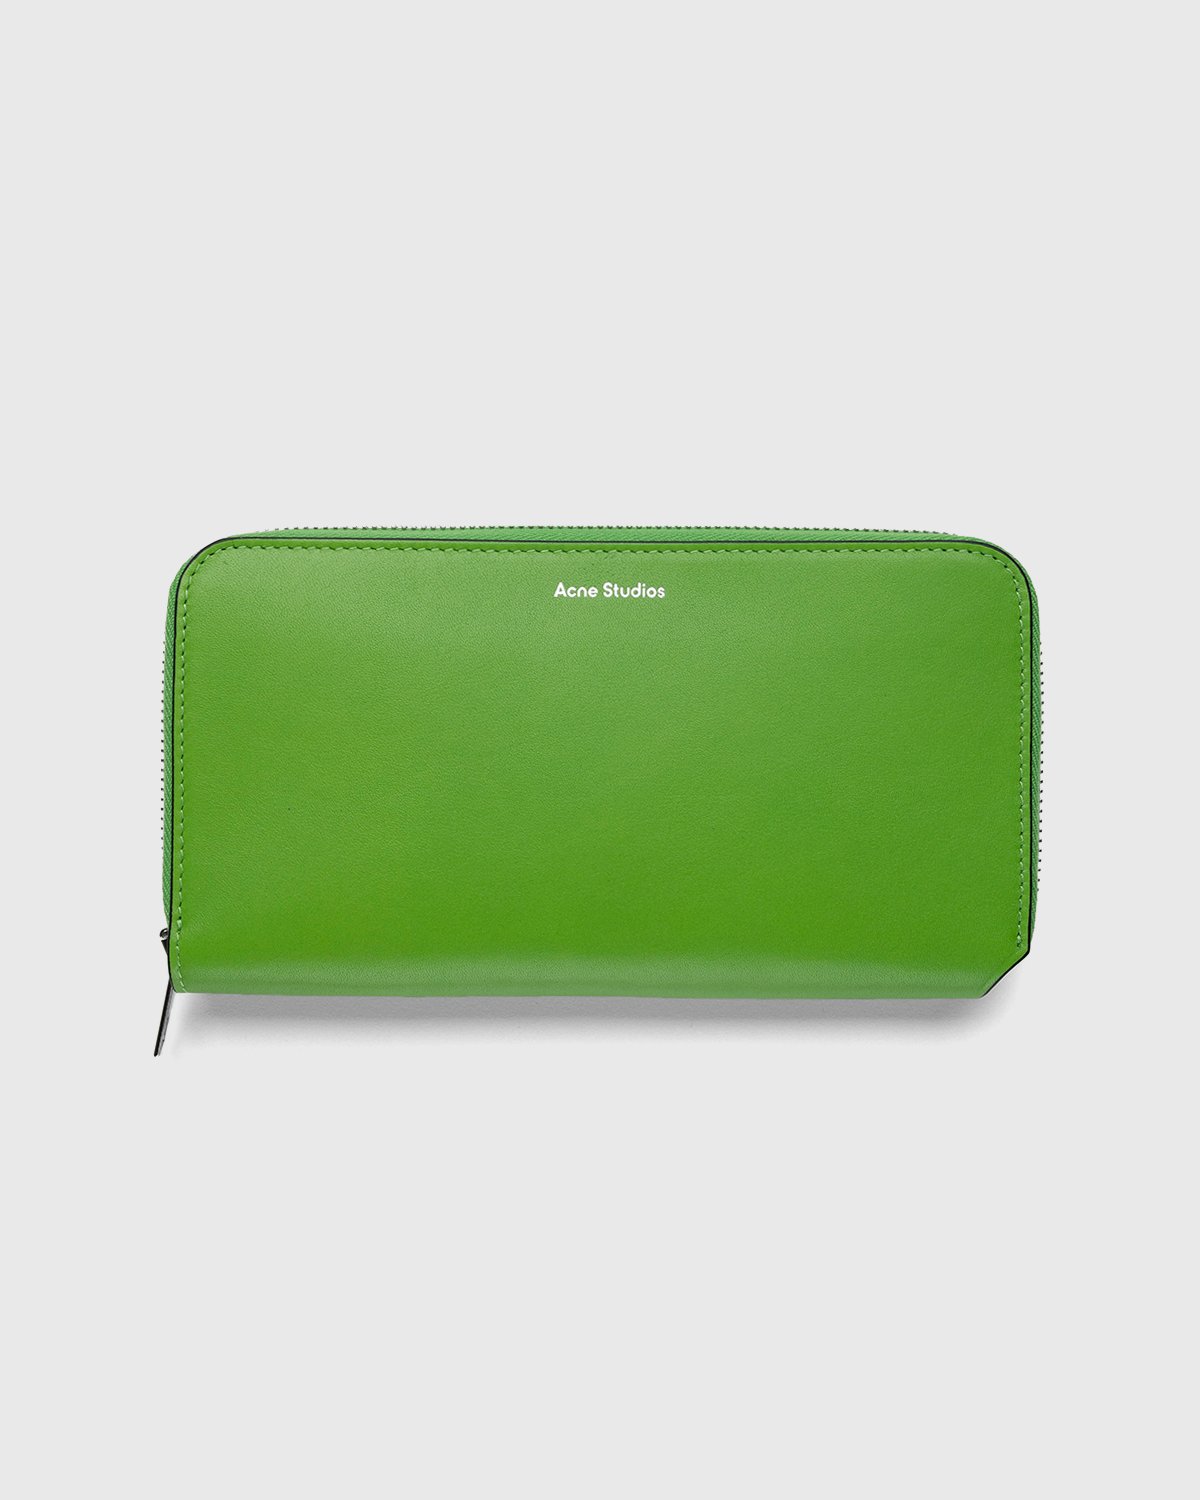 Acne Studios - Continental Wallet Multi Green - Accessories - Green - Image 1